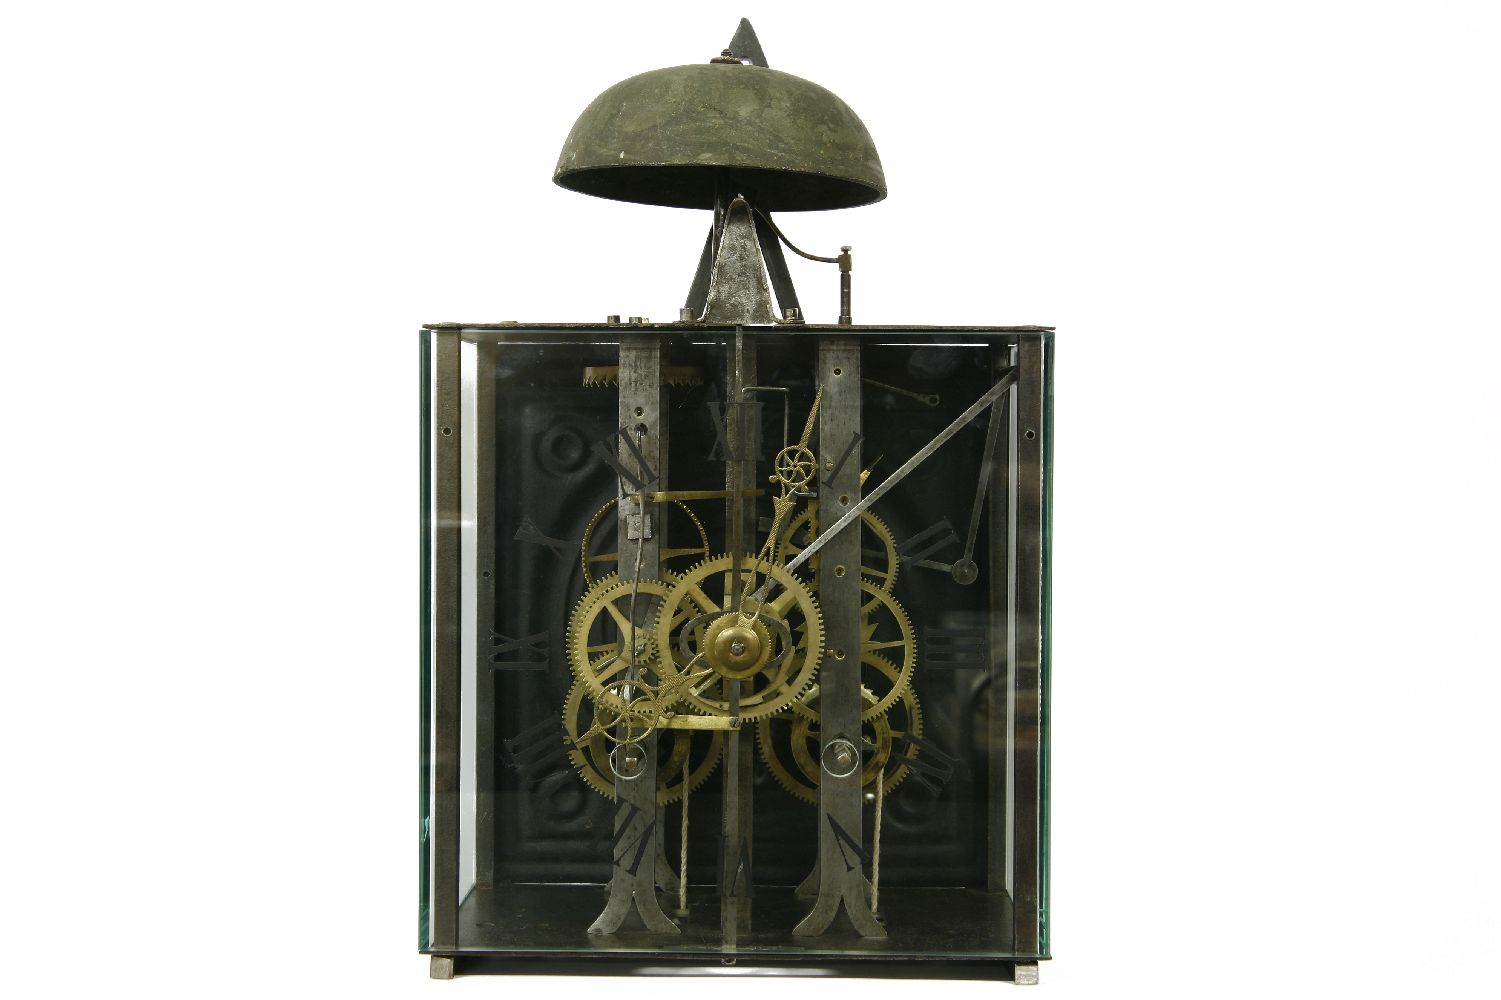 An 18th century Continental eight day hour striking clock movement, pendulum and weights, now